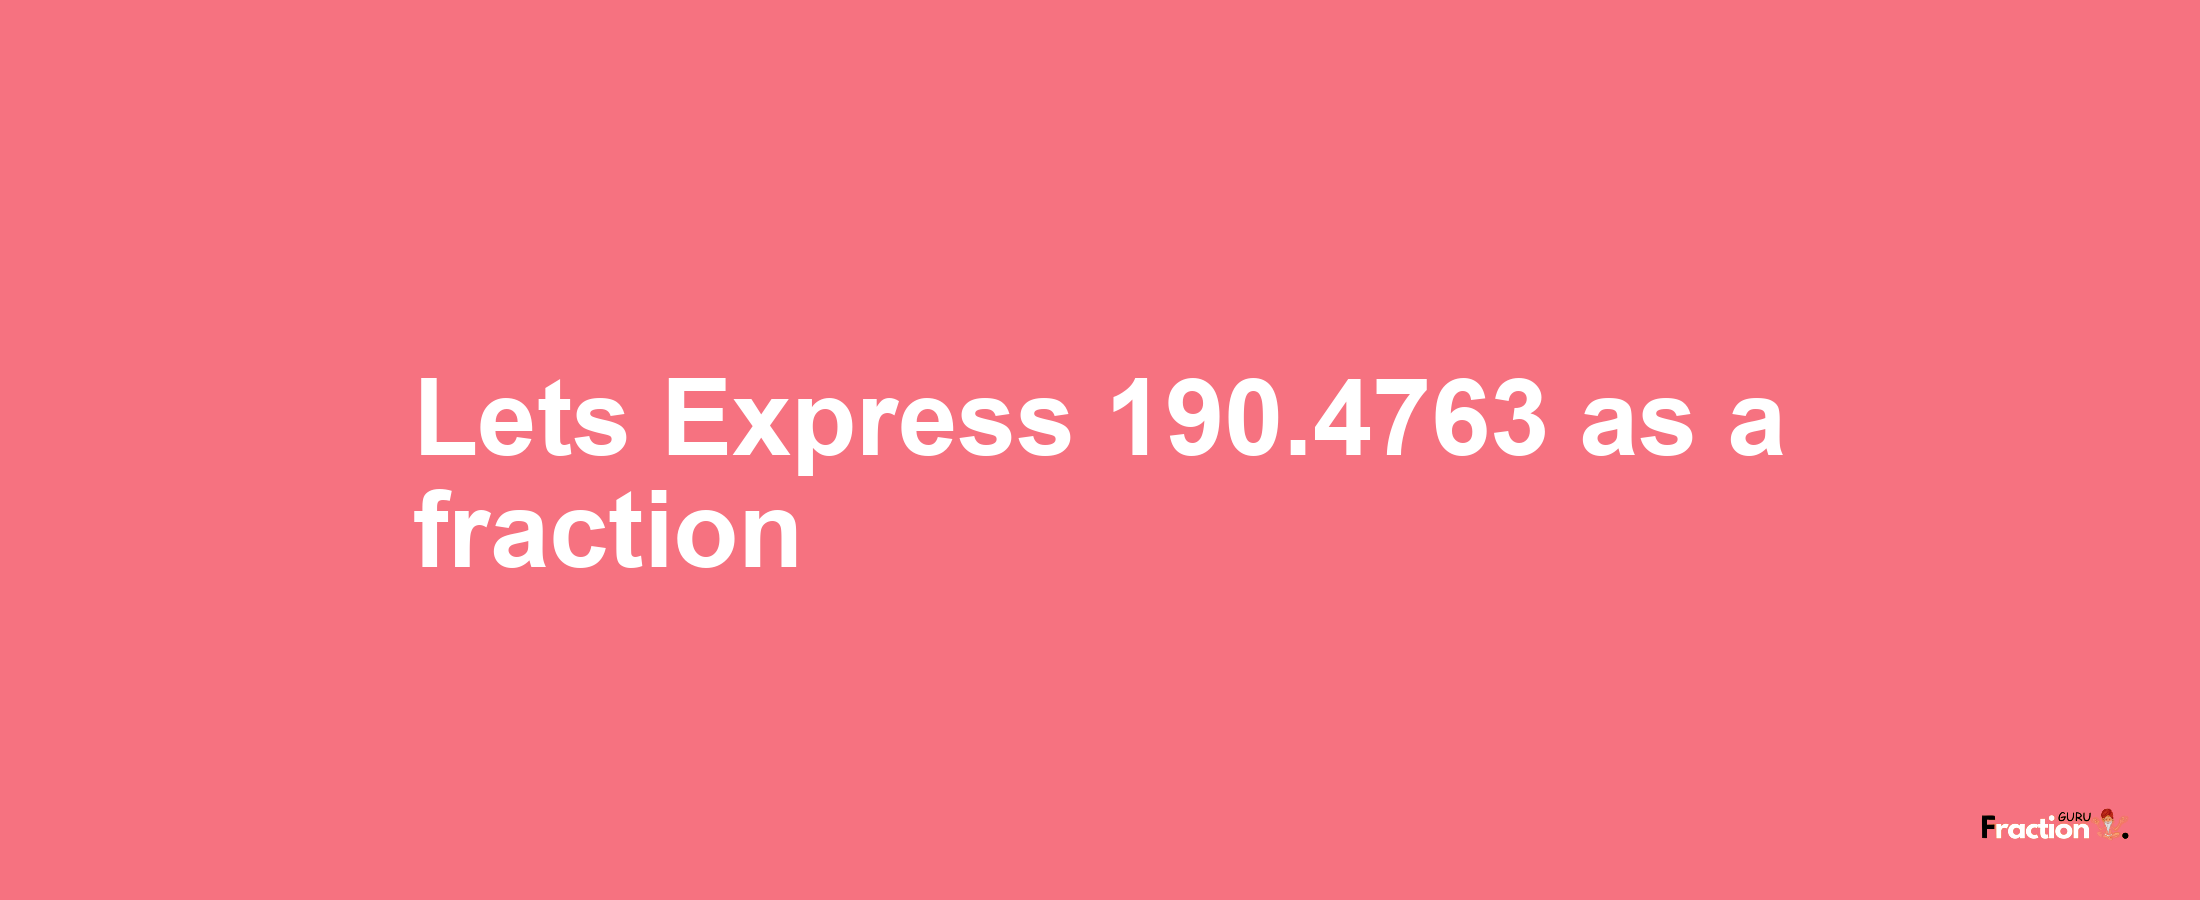 Lets Express 190.4763 as afraction